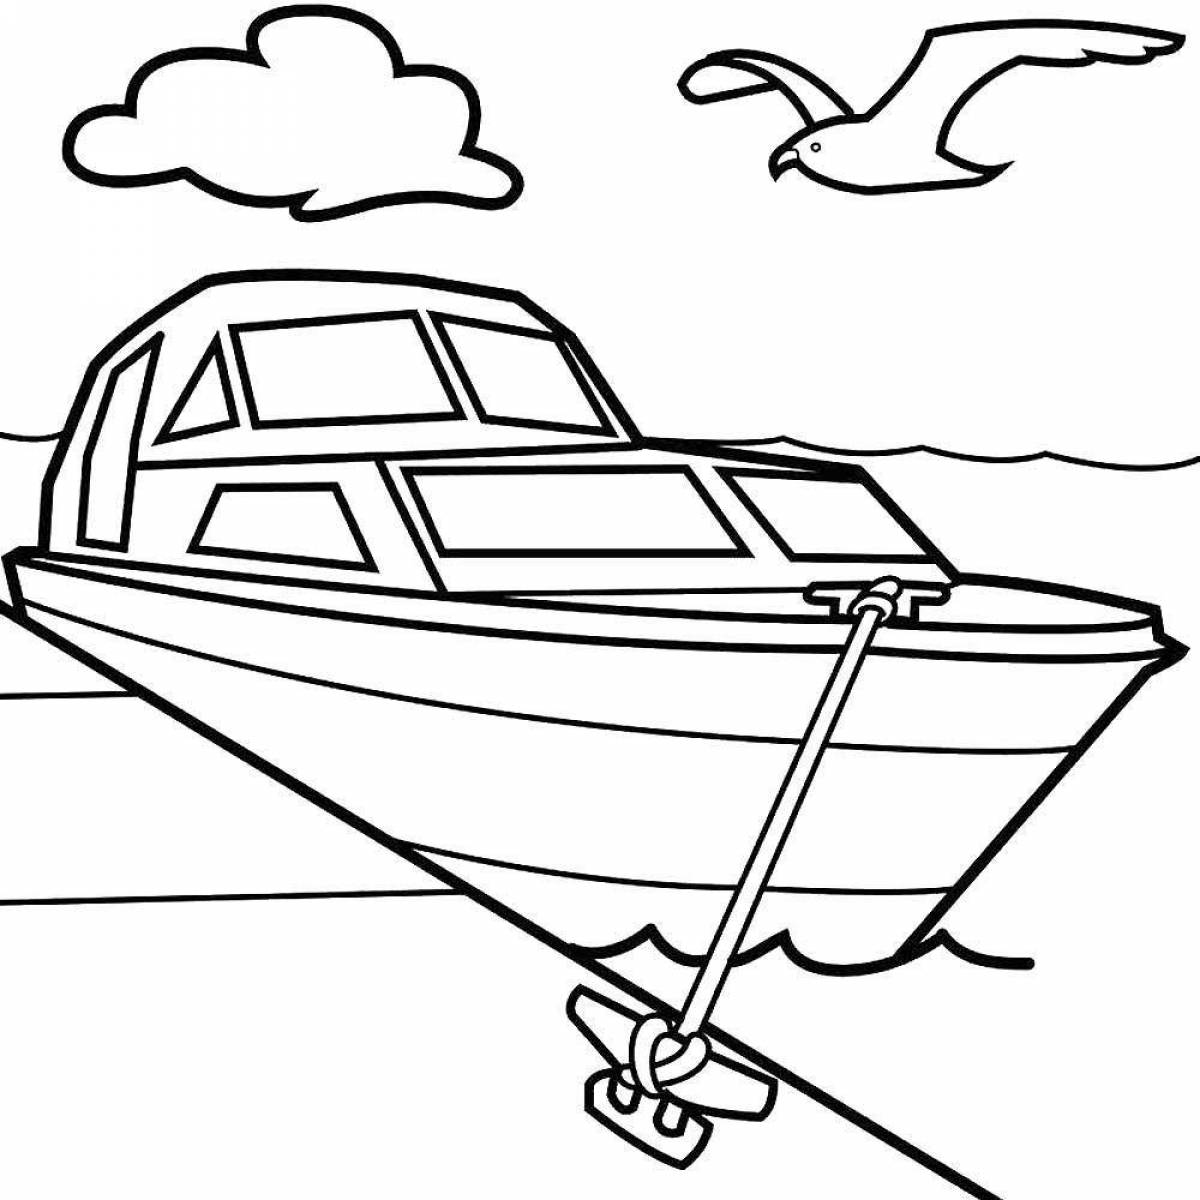 Coloring page dazzling yacht